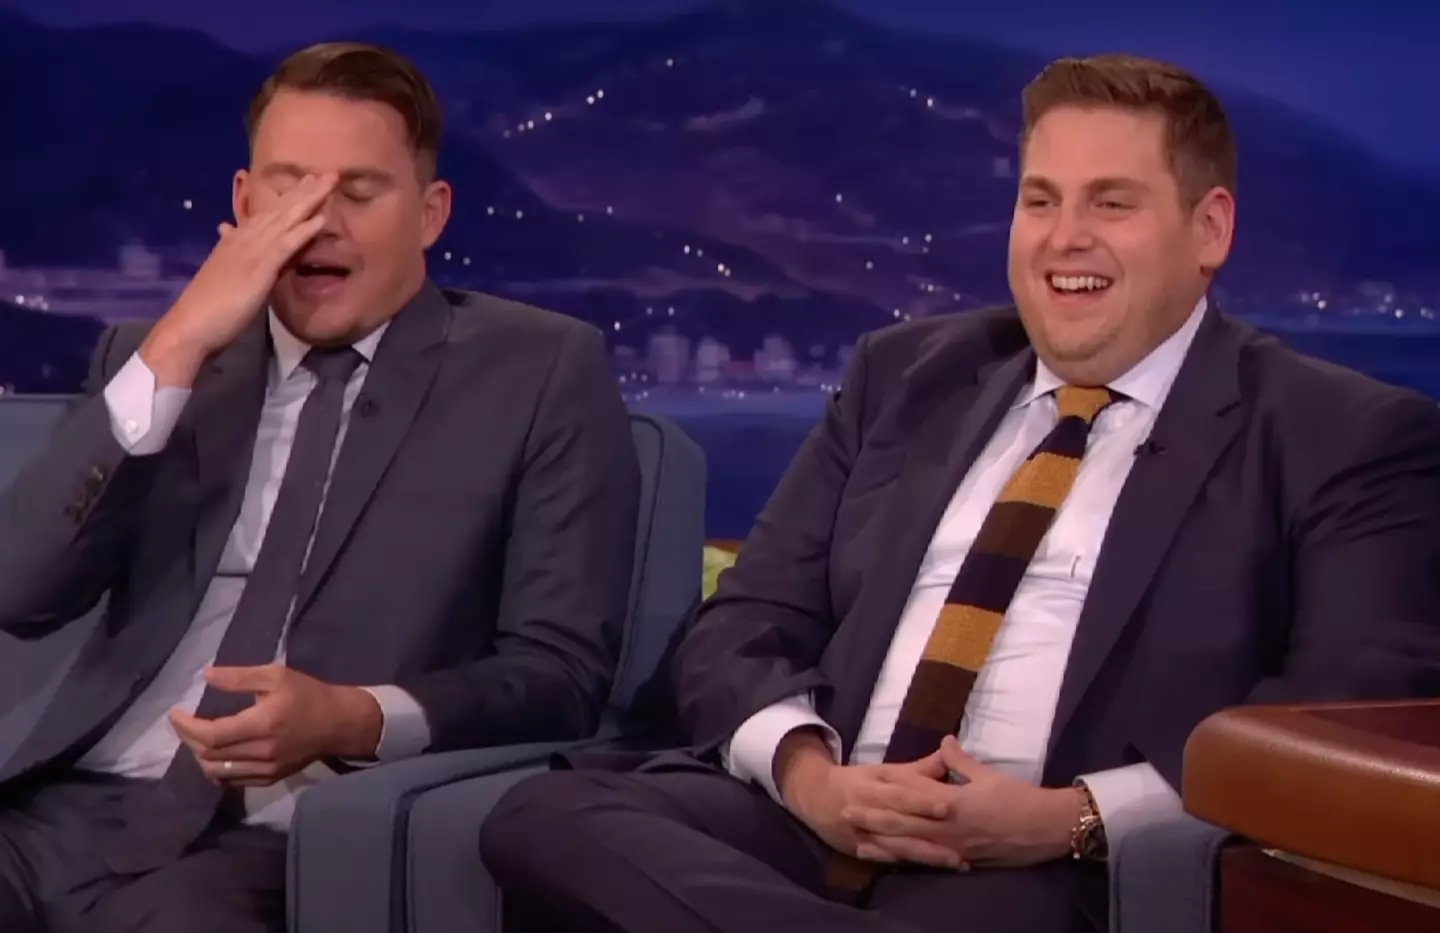 Channing was pretty embarrassed talking about the role.